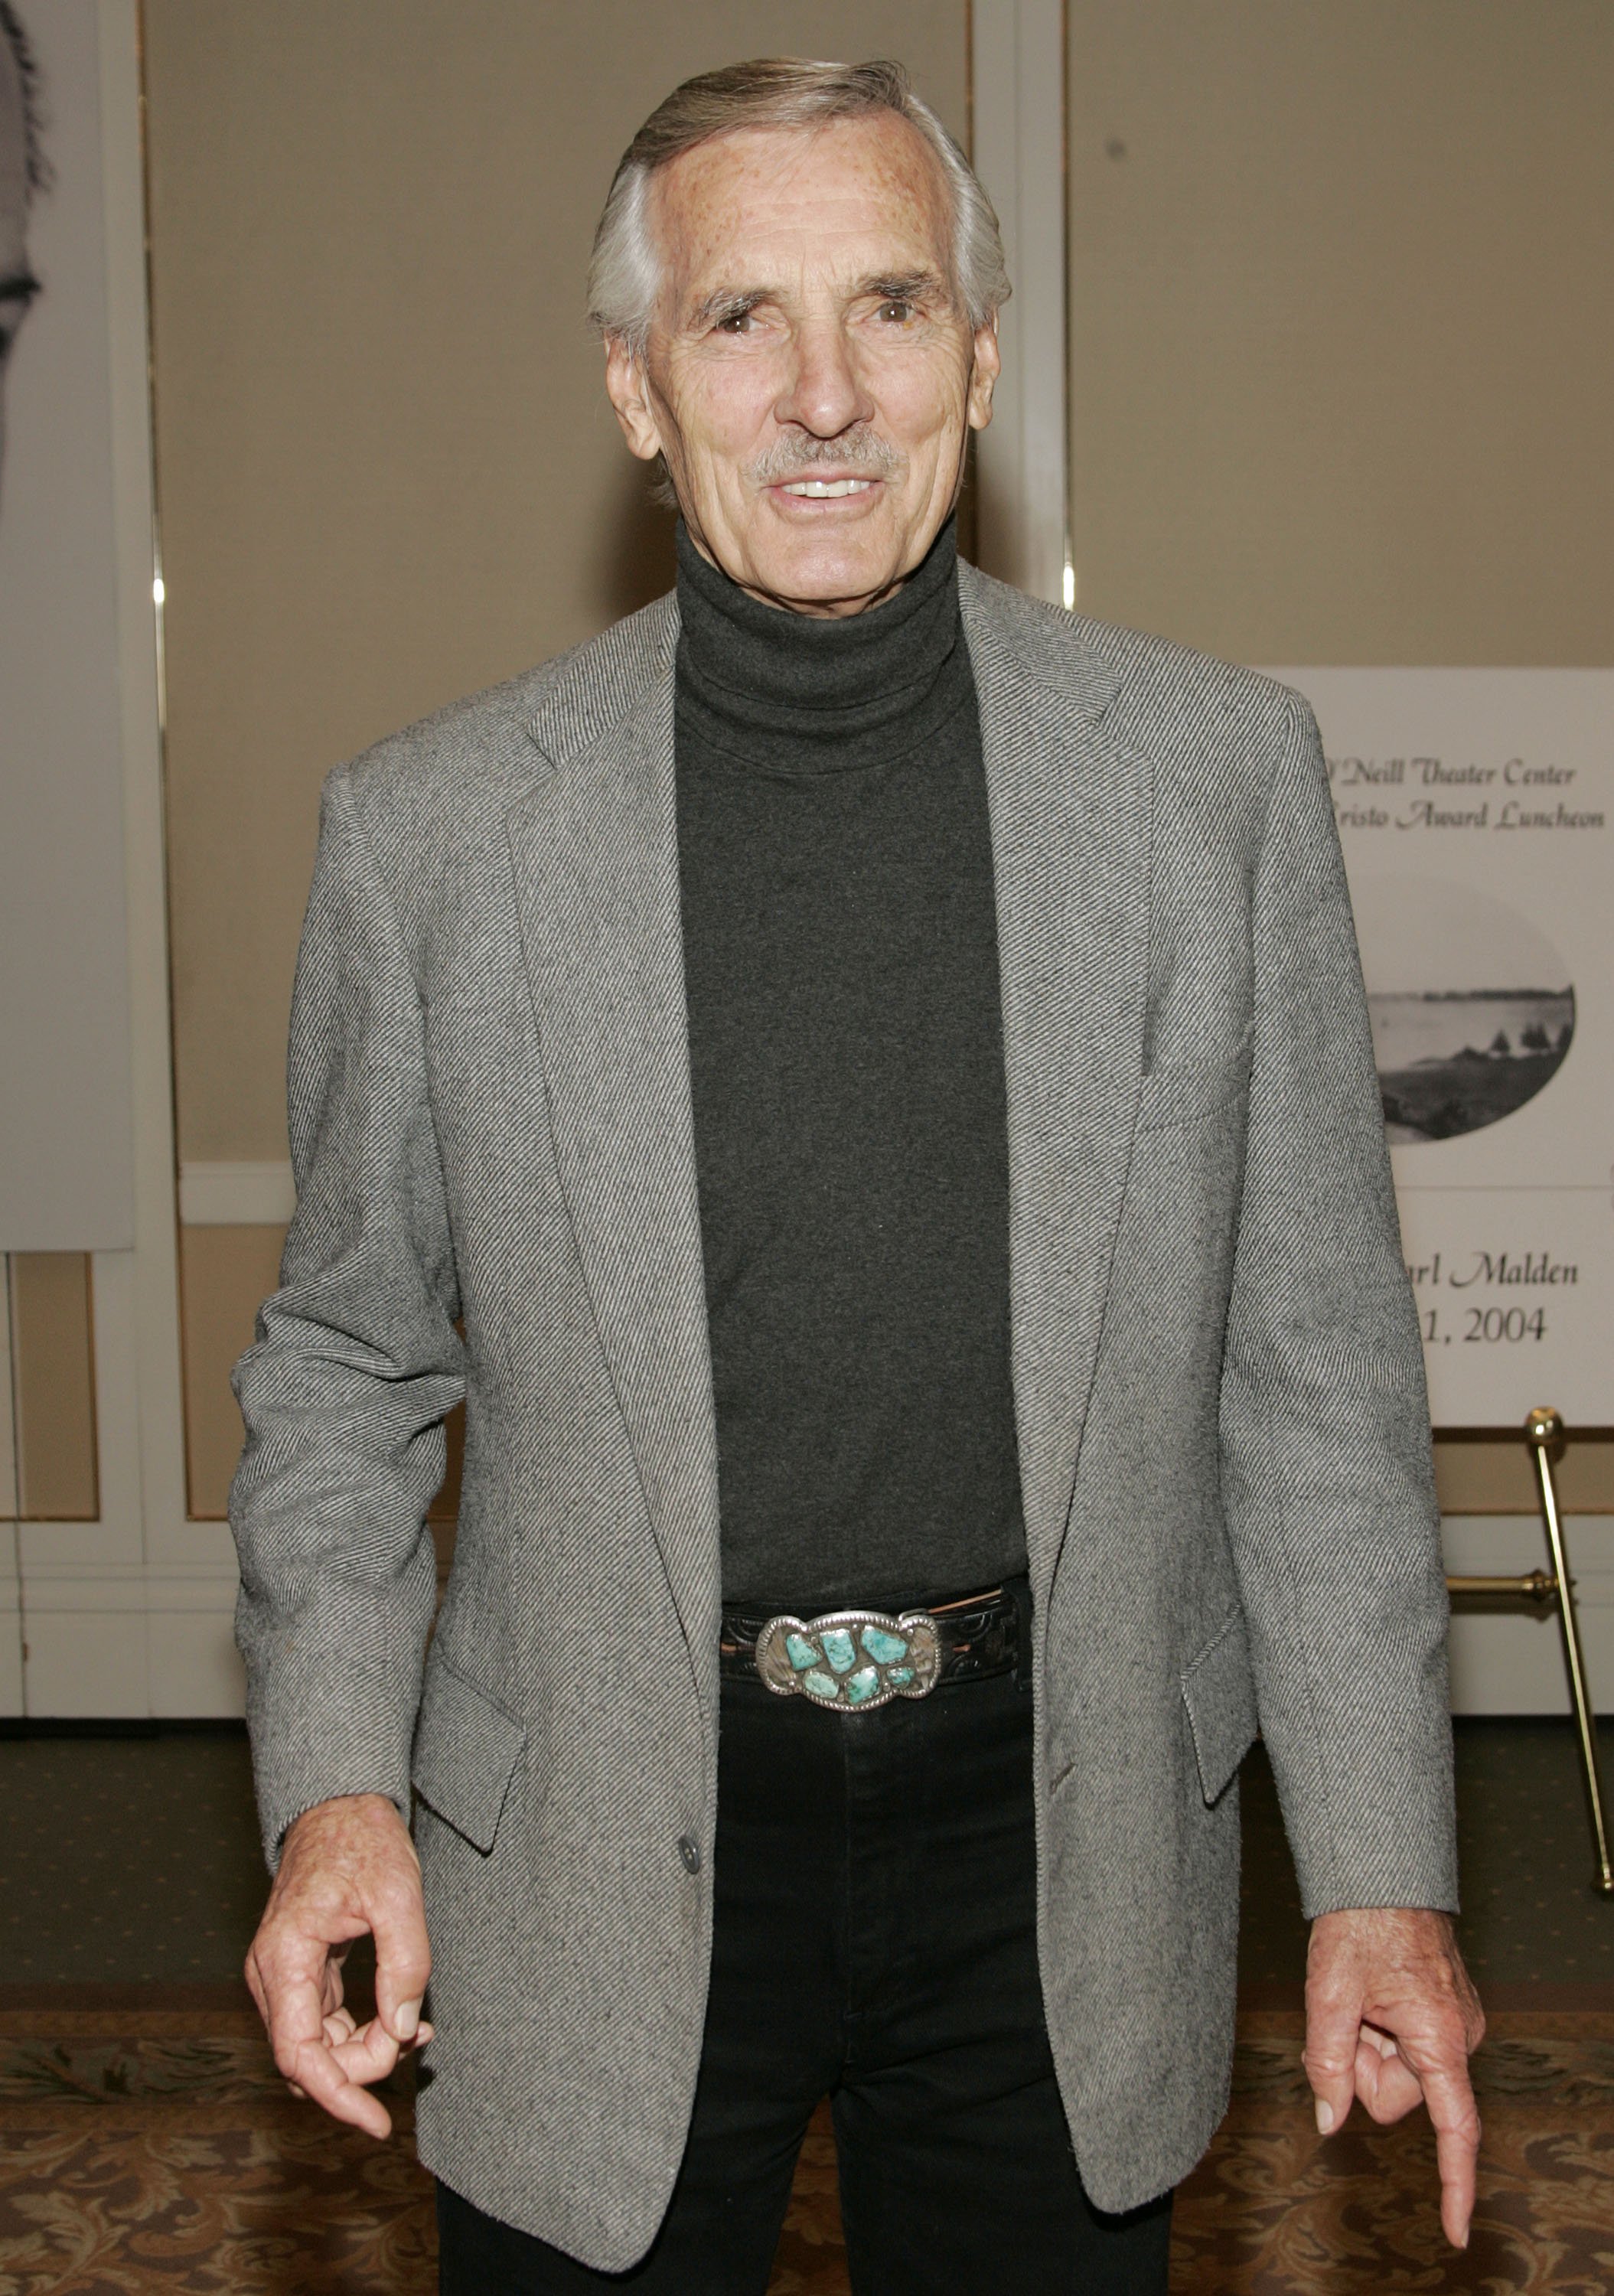 Dennis Weaver in Beverly Hills, California, United States on November 11, 2004 | Source: Getty Images